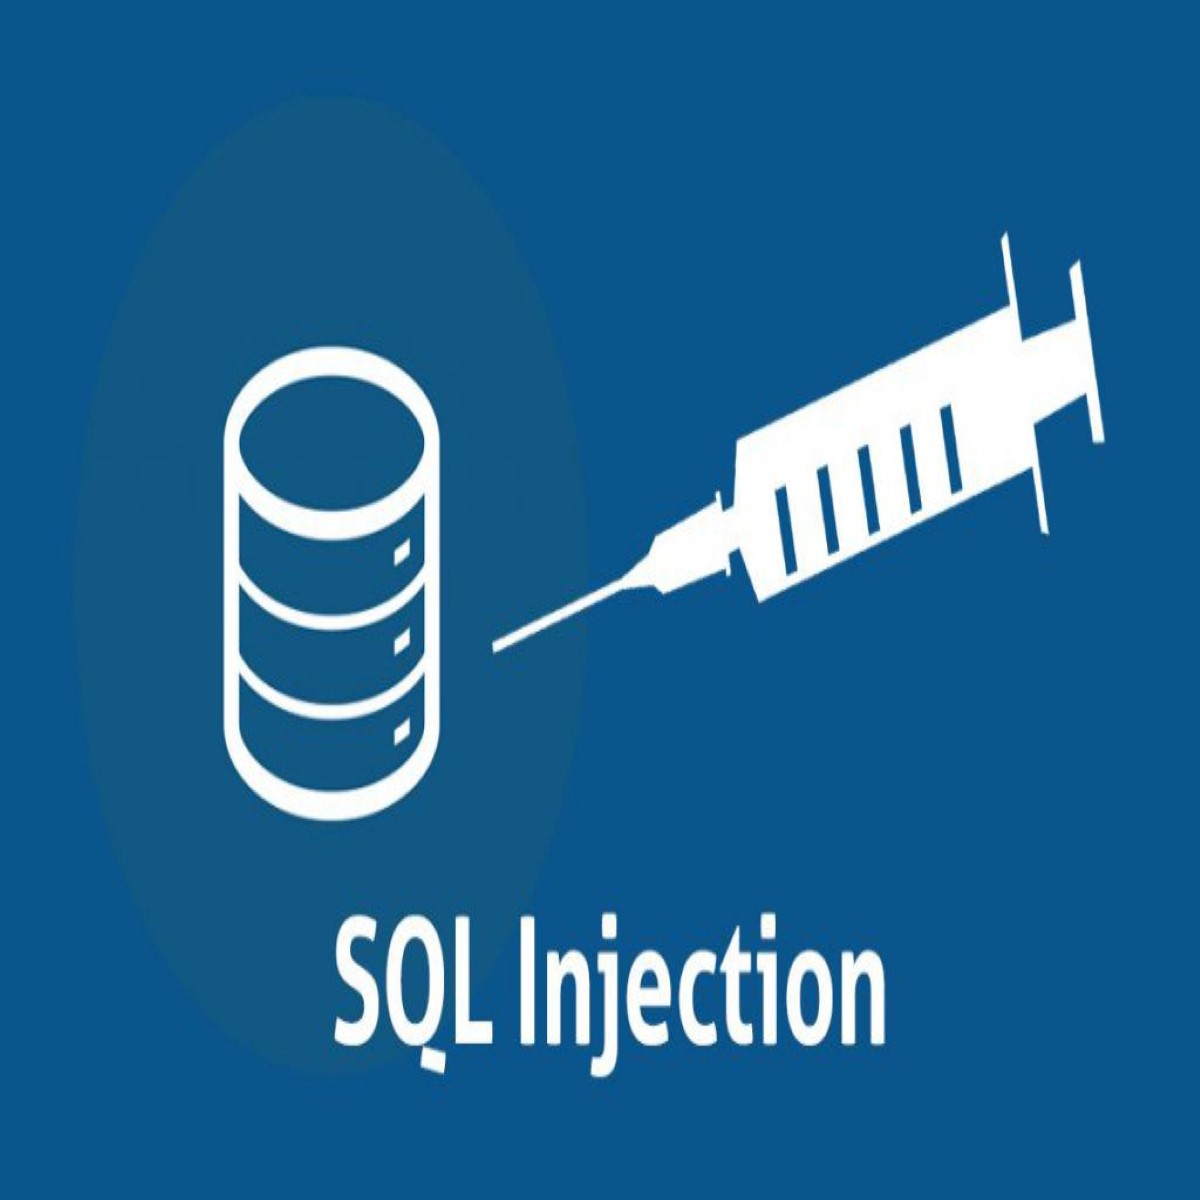 Moodle SQL injection vulnerability